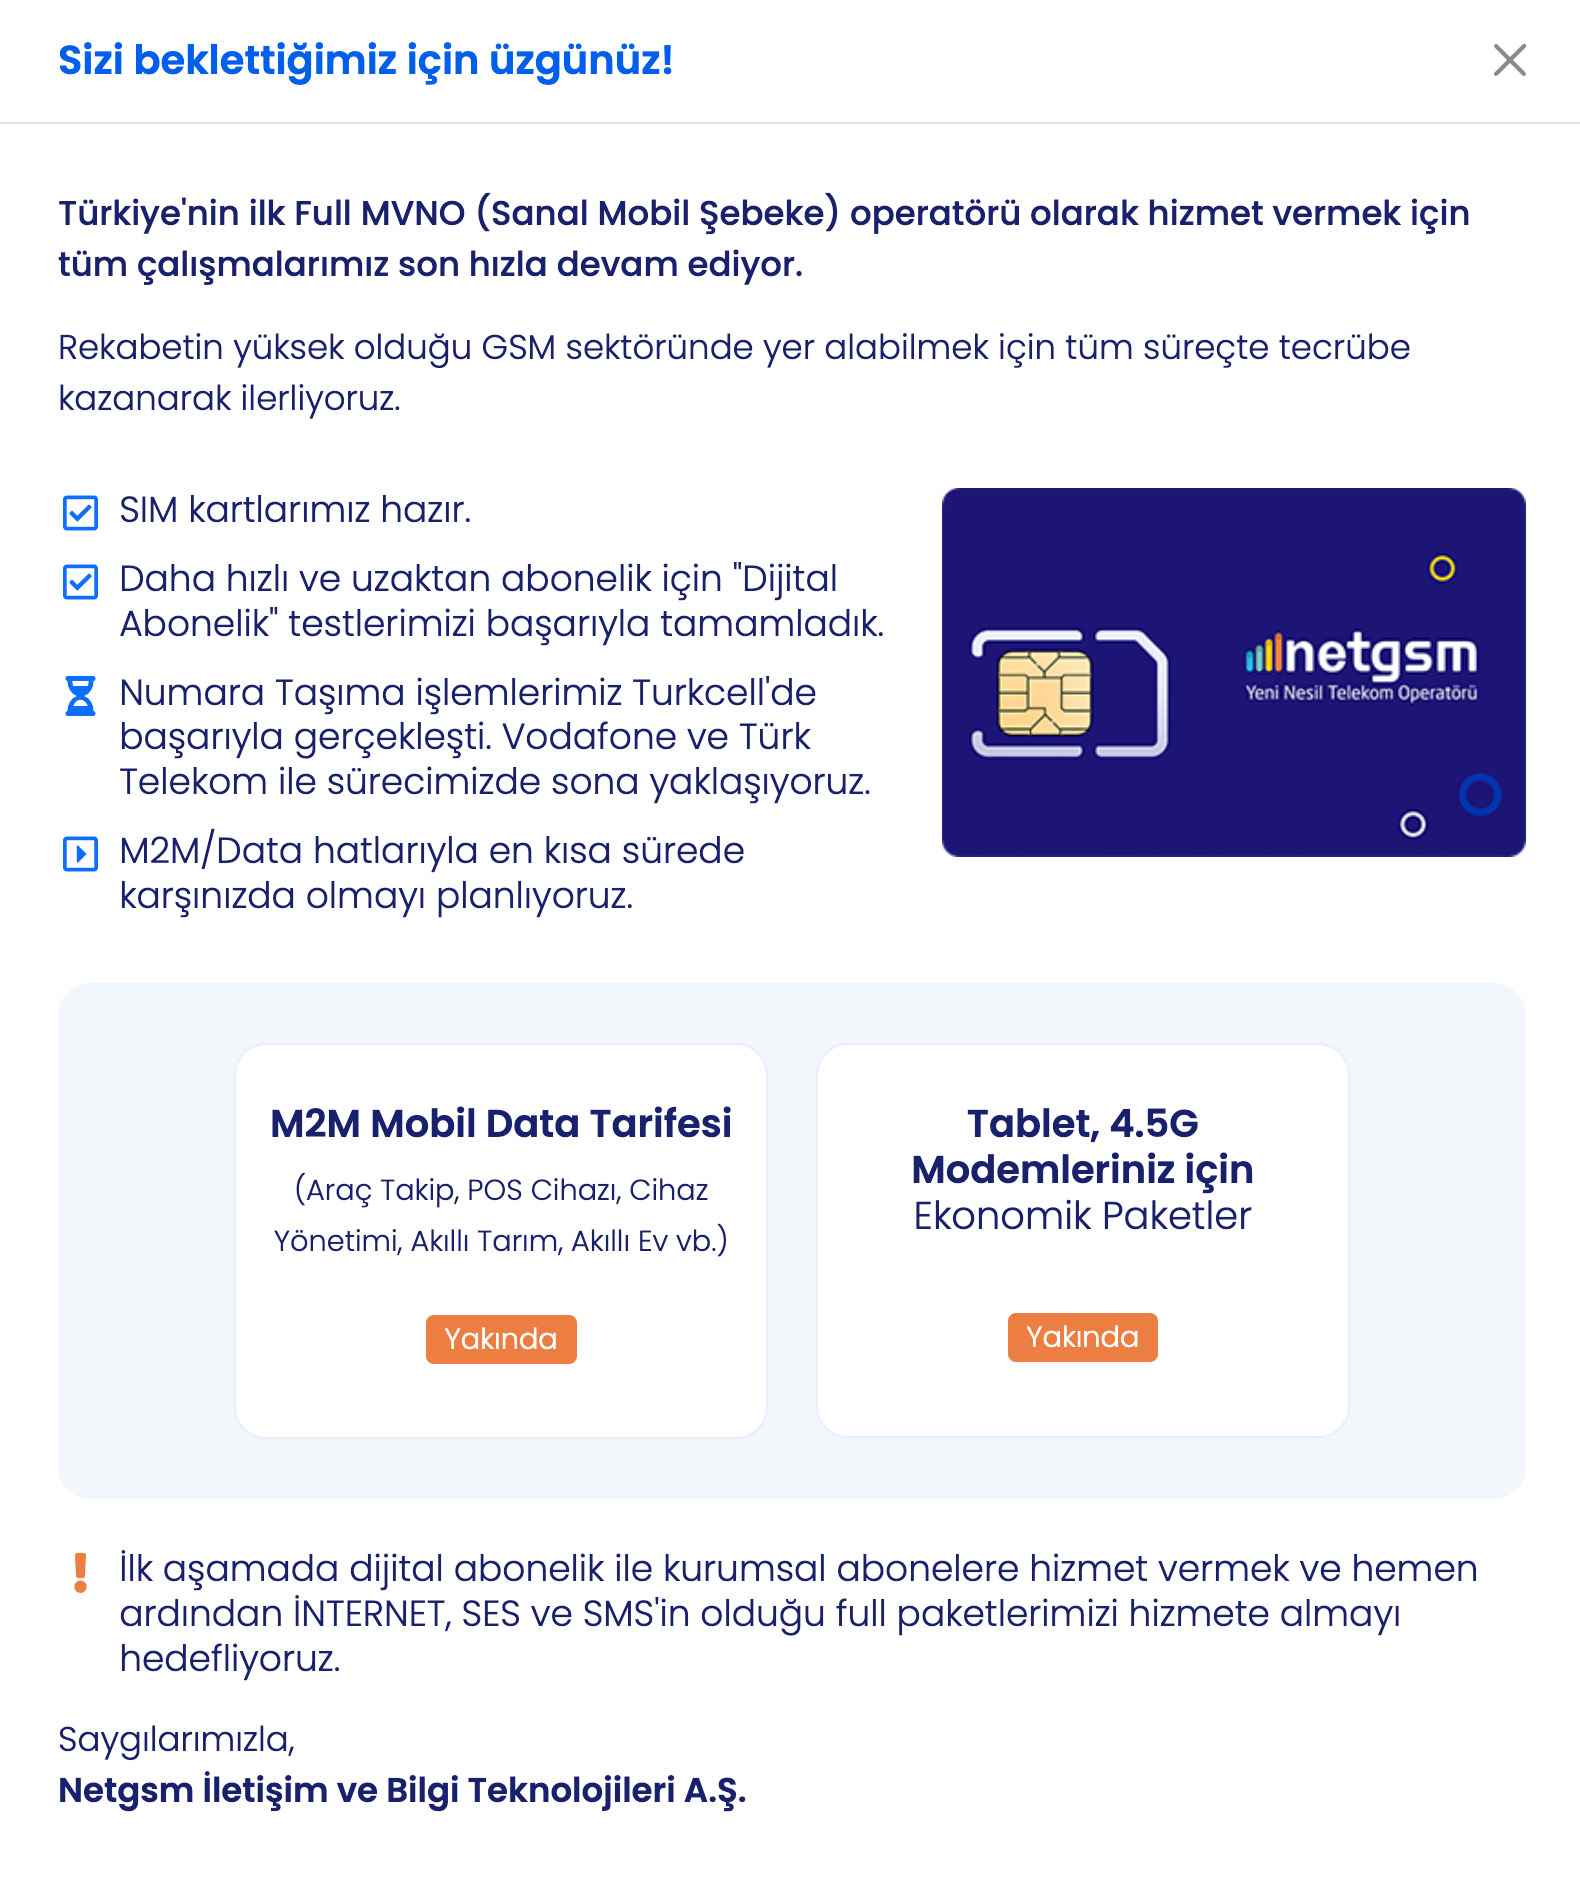 1650040303 97 Turkeys 4th GSM operator Netgsm announced the current situation